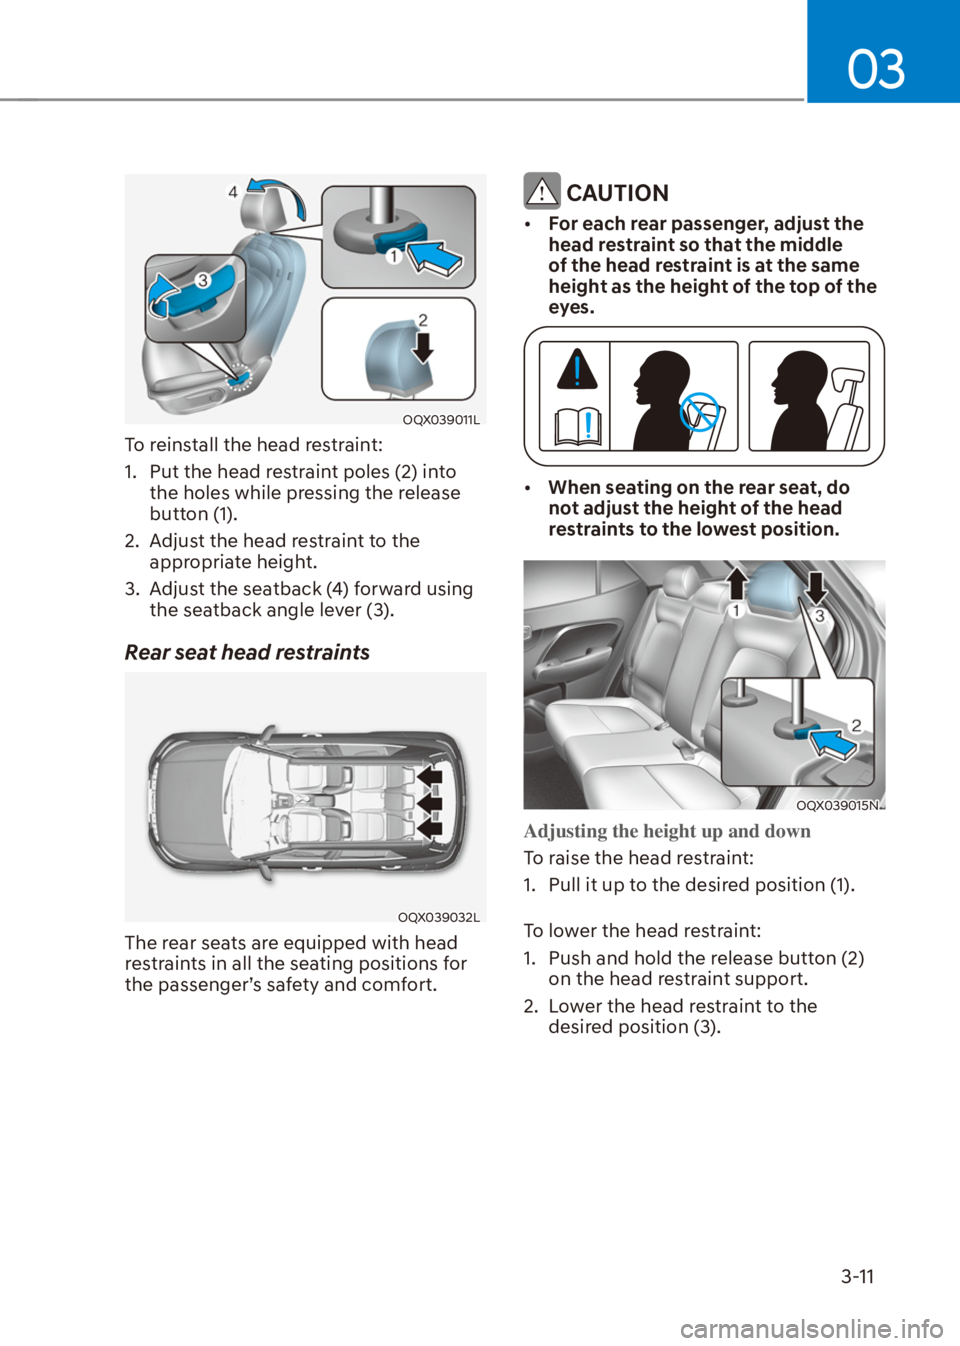 HYUNDAI VENUE 2022 Owners Guide 03
3-11
OQX039011L
To reinstall the head restraint:
1.  Put the head restraint poles (2) into 
the holes while pressing the release 
button (1).
2.  Adjust the head restraint to the 
appropriate heigh